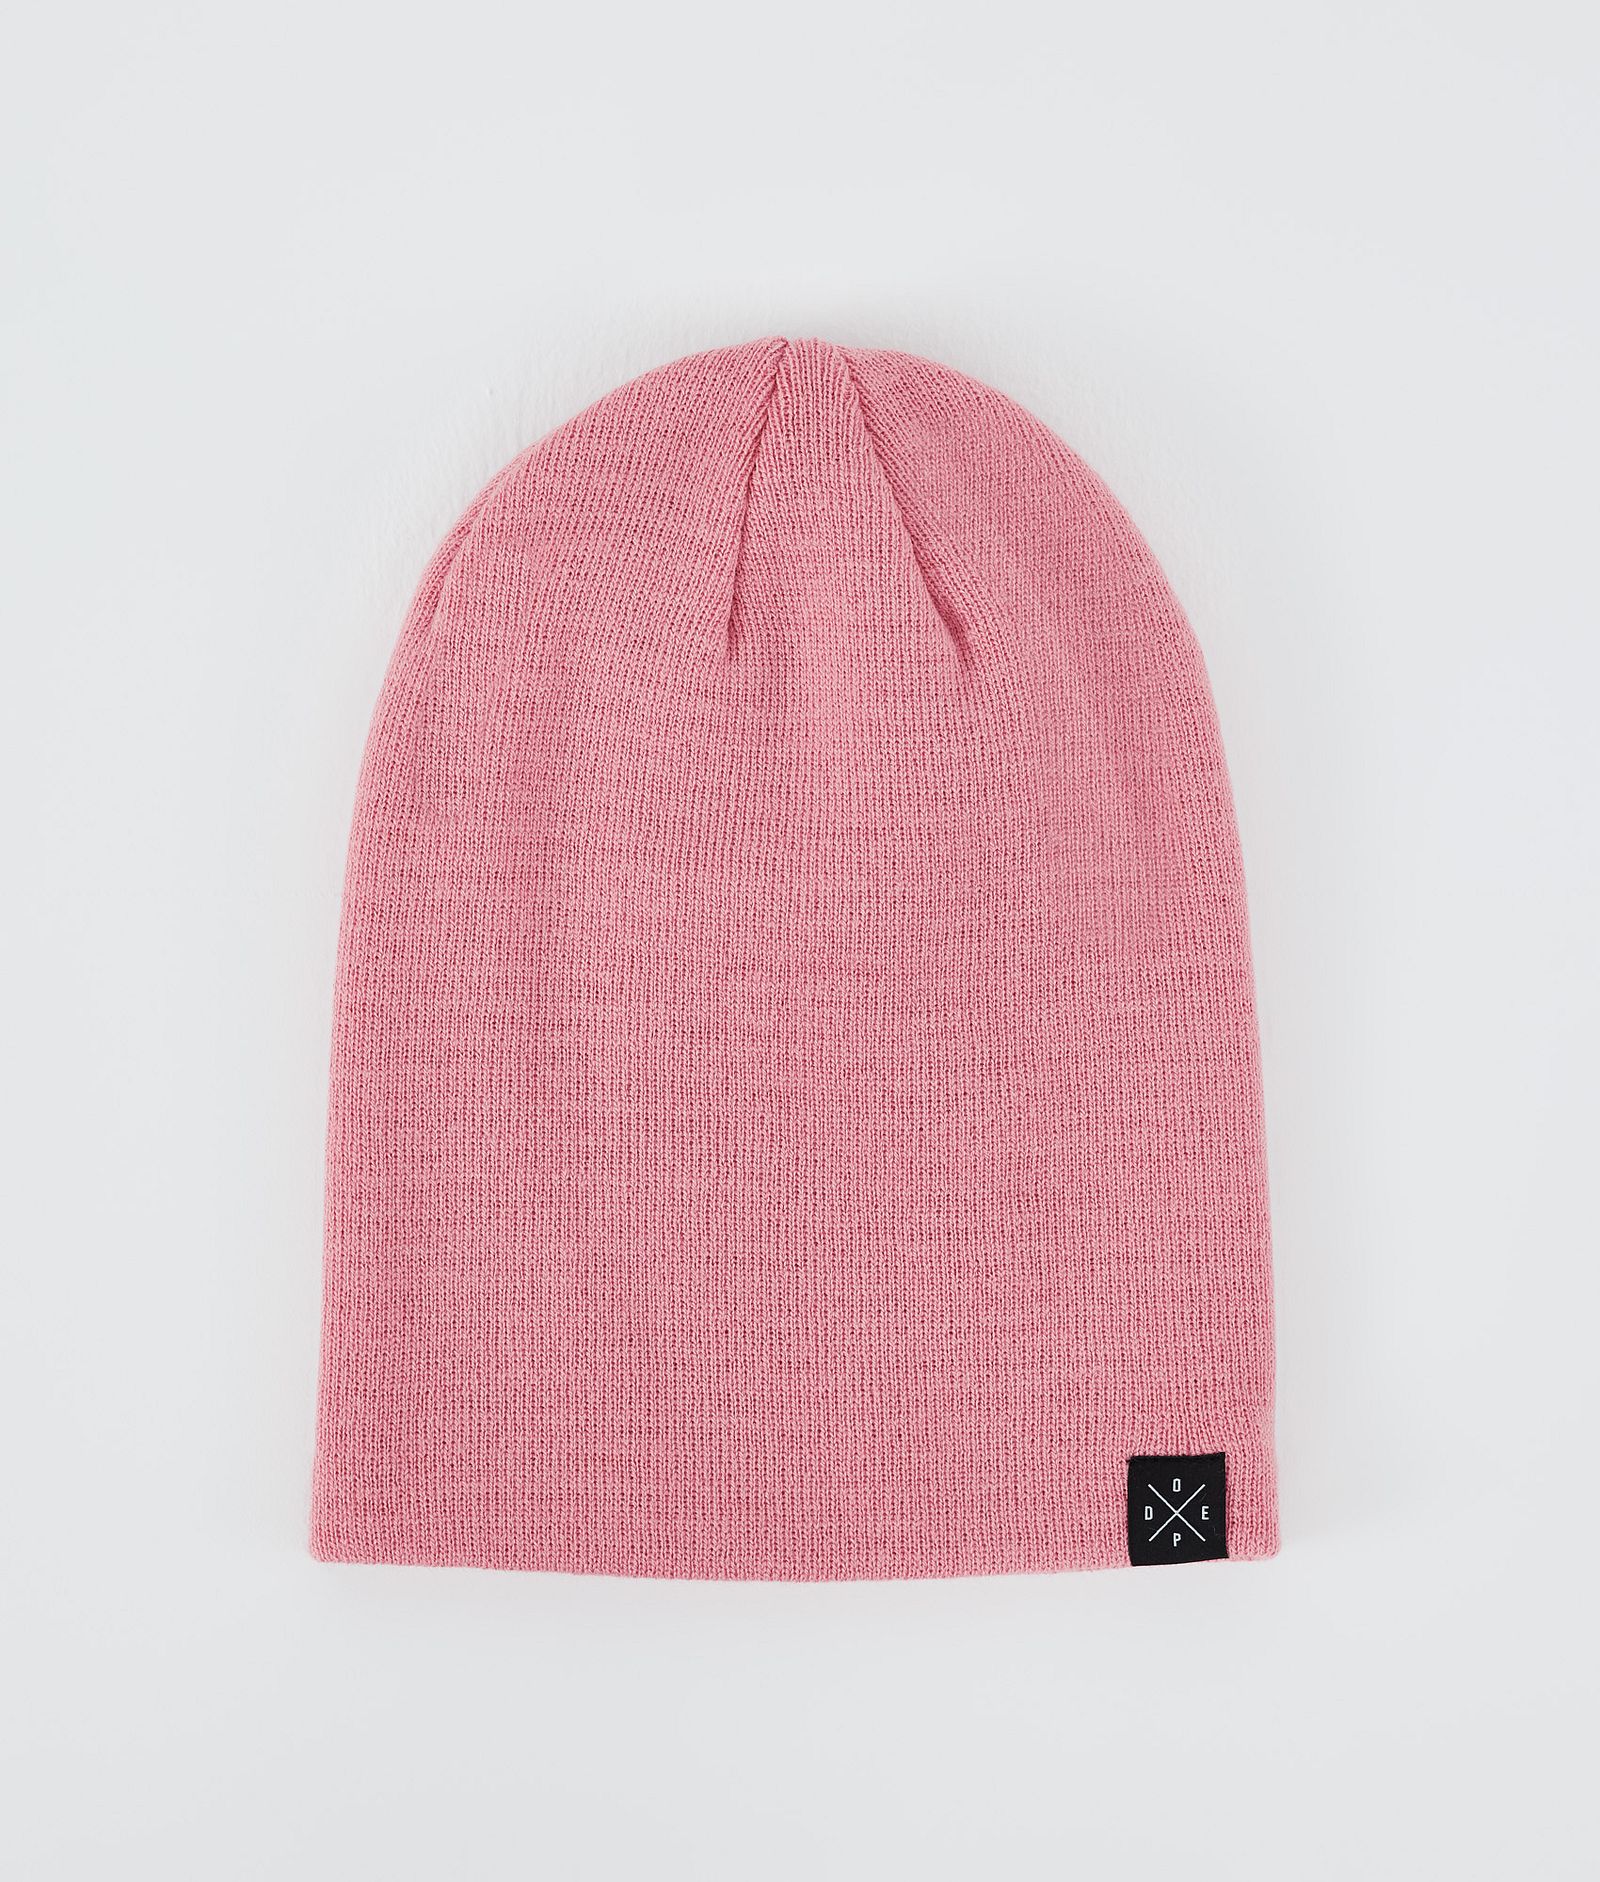 Dope Solitude 2022 Beanie Pink, Image 2 of 4